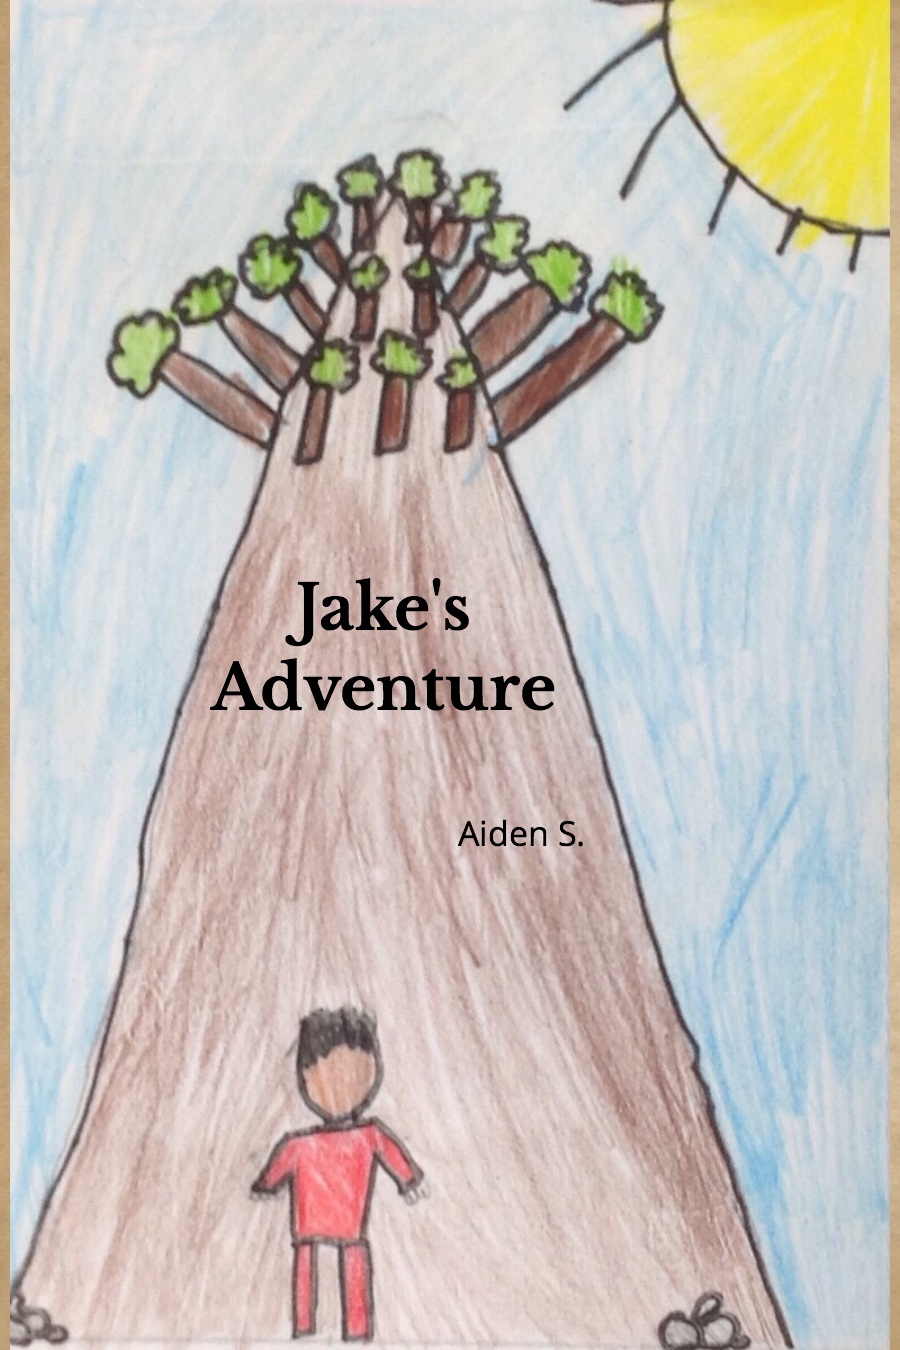 Jakes Adventure by Aiden S